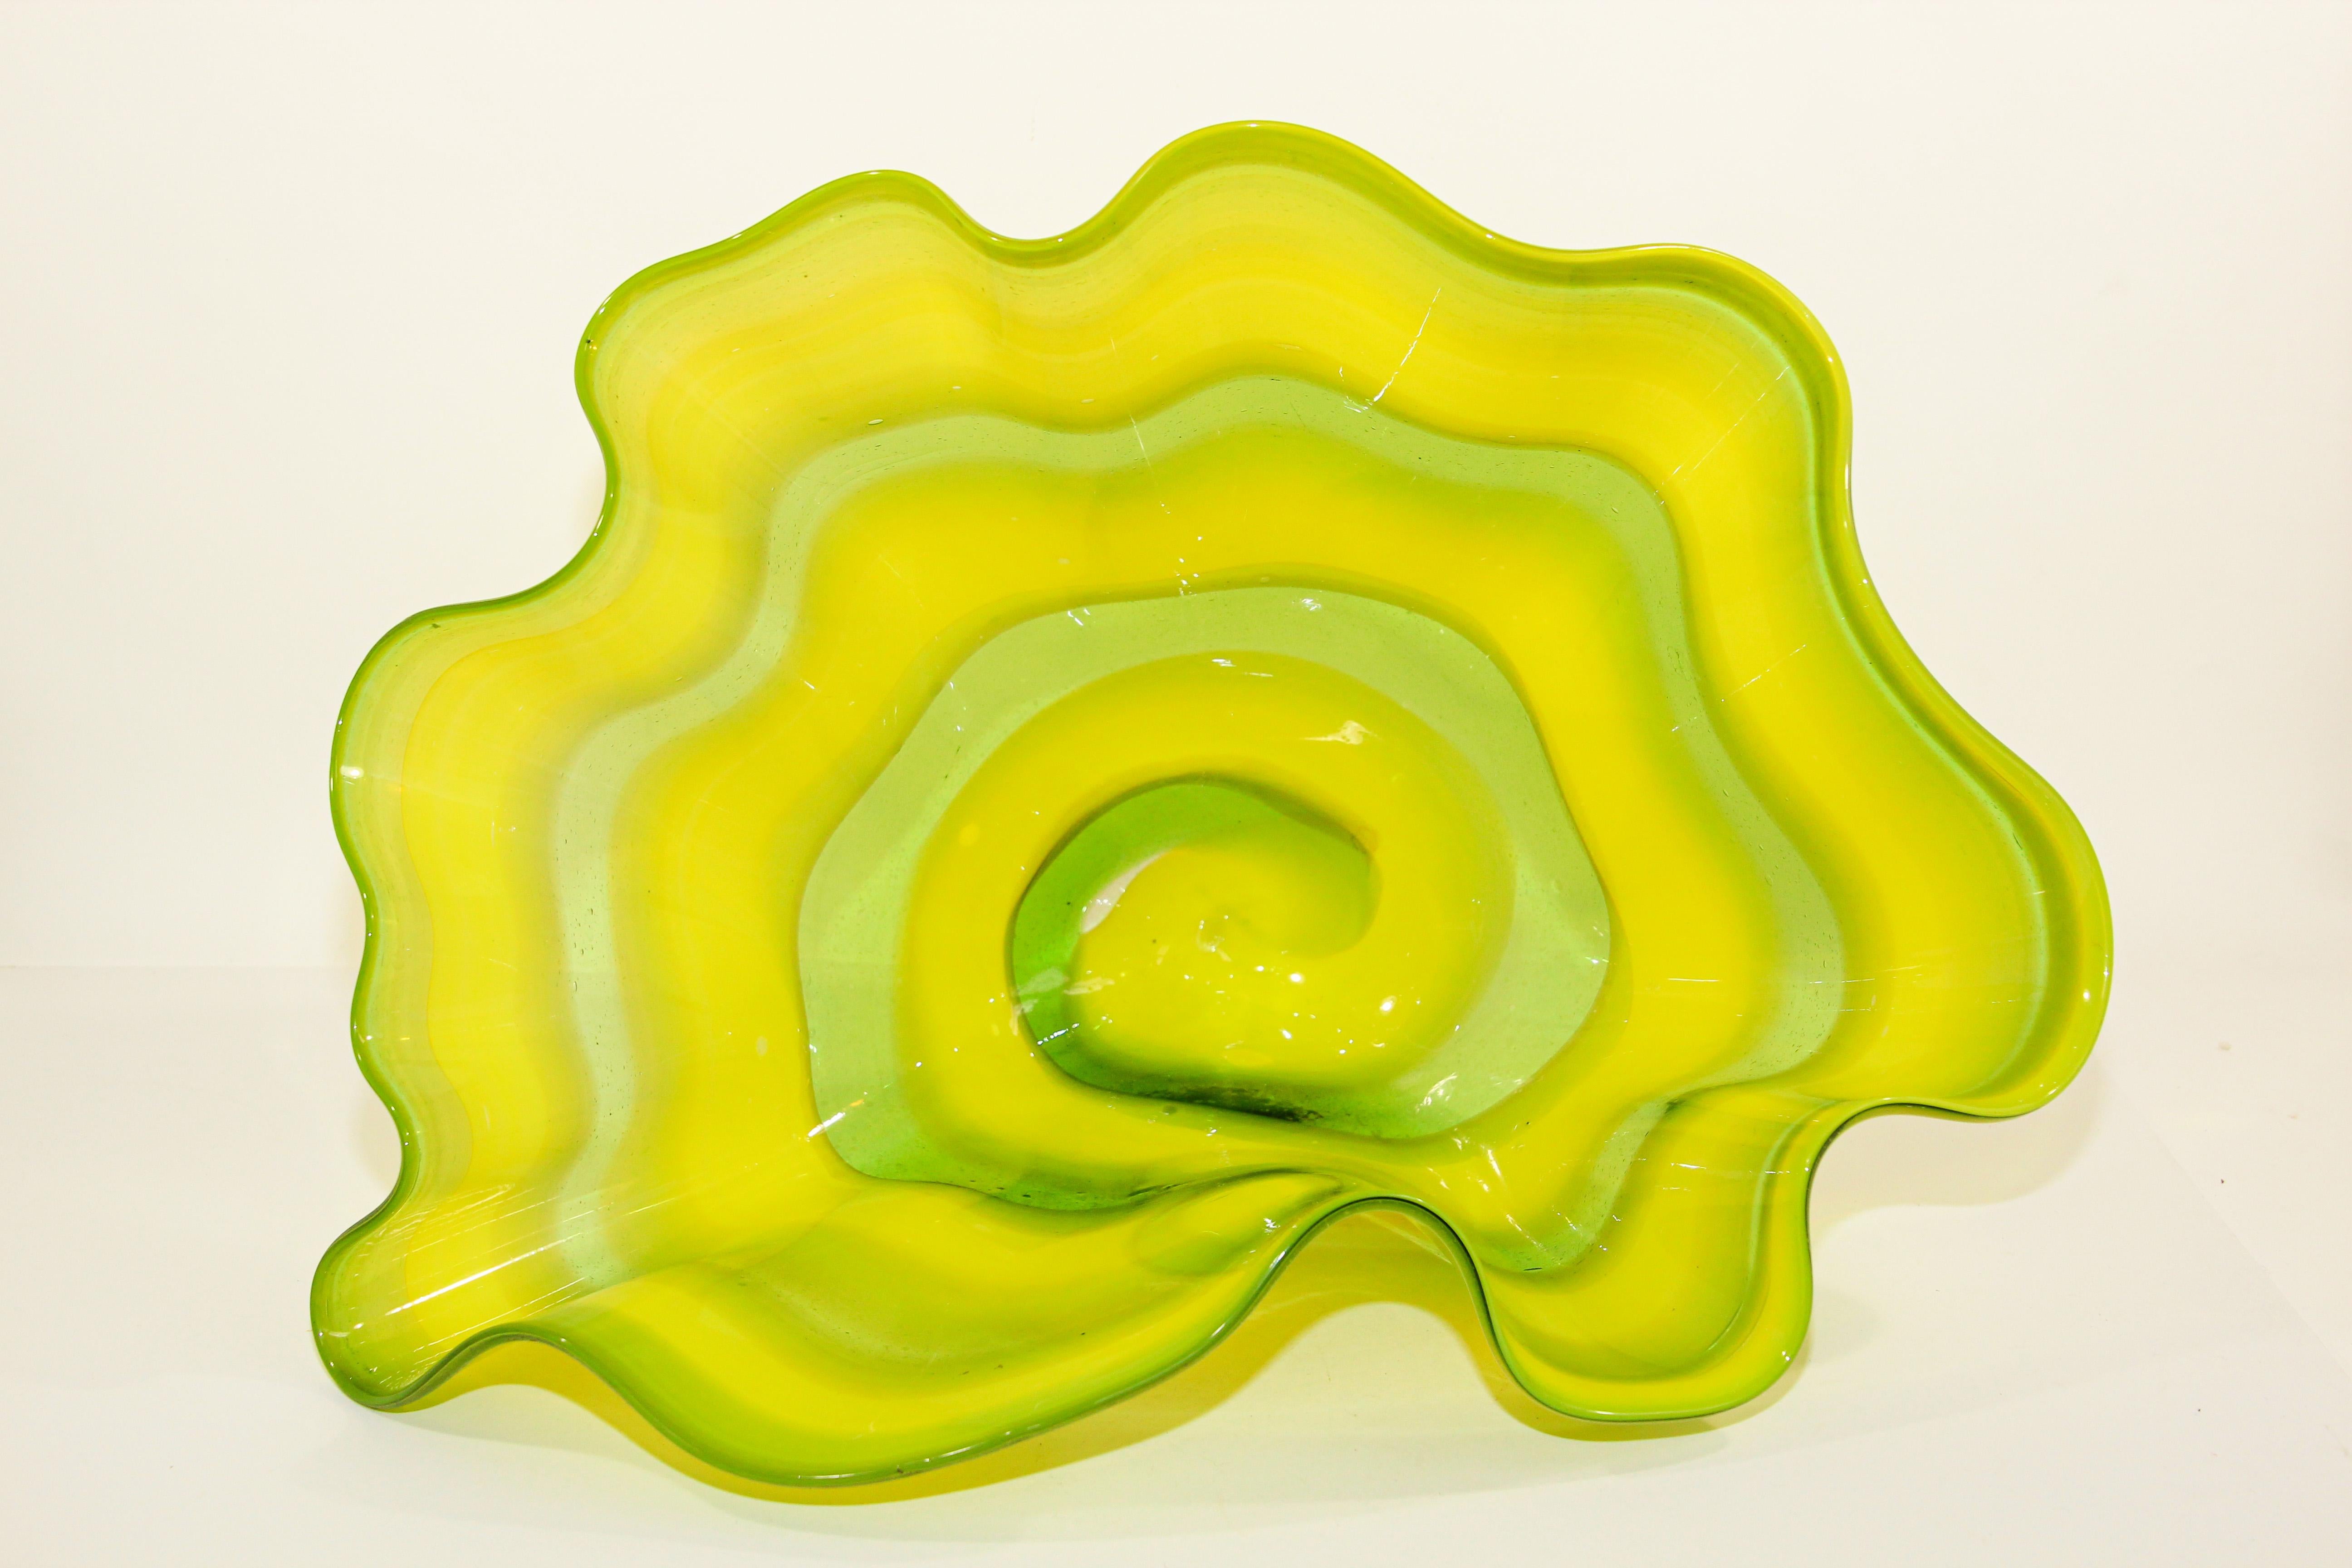 Large Murano glass green and yellow sea form bowl, in the style of Chihuly.
A stunning art work large scale with seamless color transition of greens and yellow.
Hand blown contemporary glass art.
The bowl has 19 inch width x Varying 13.75 inch